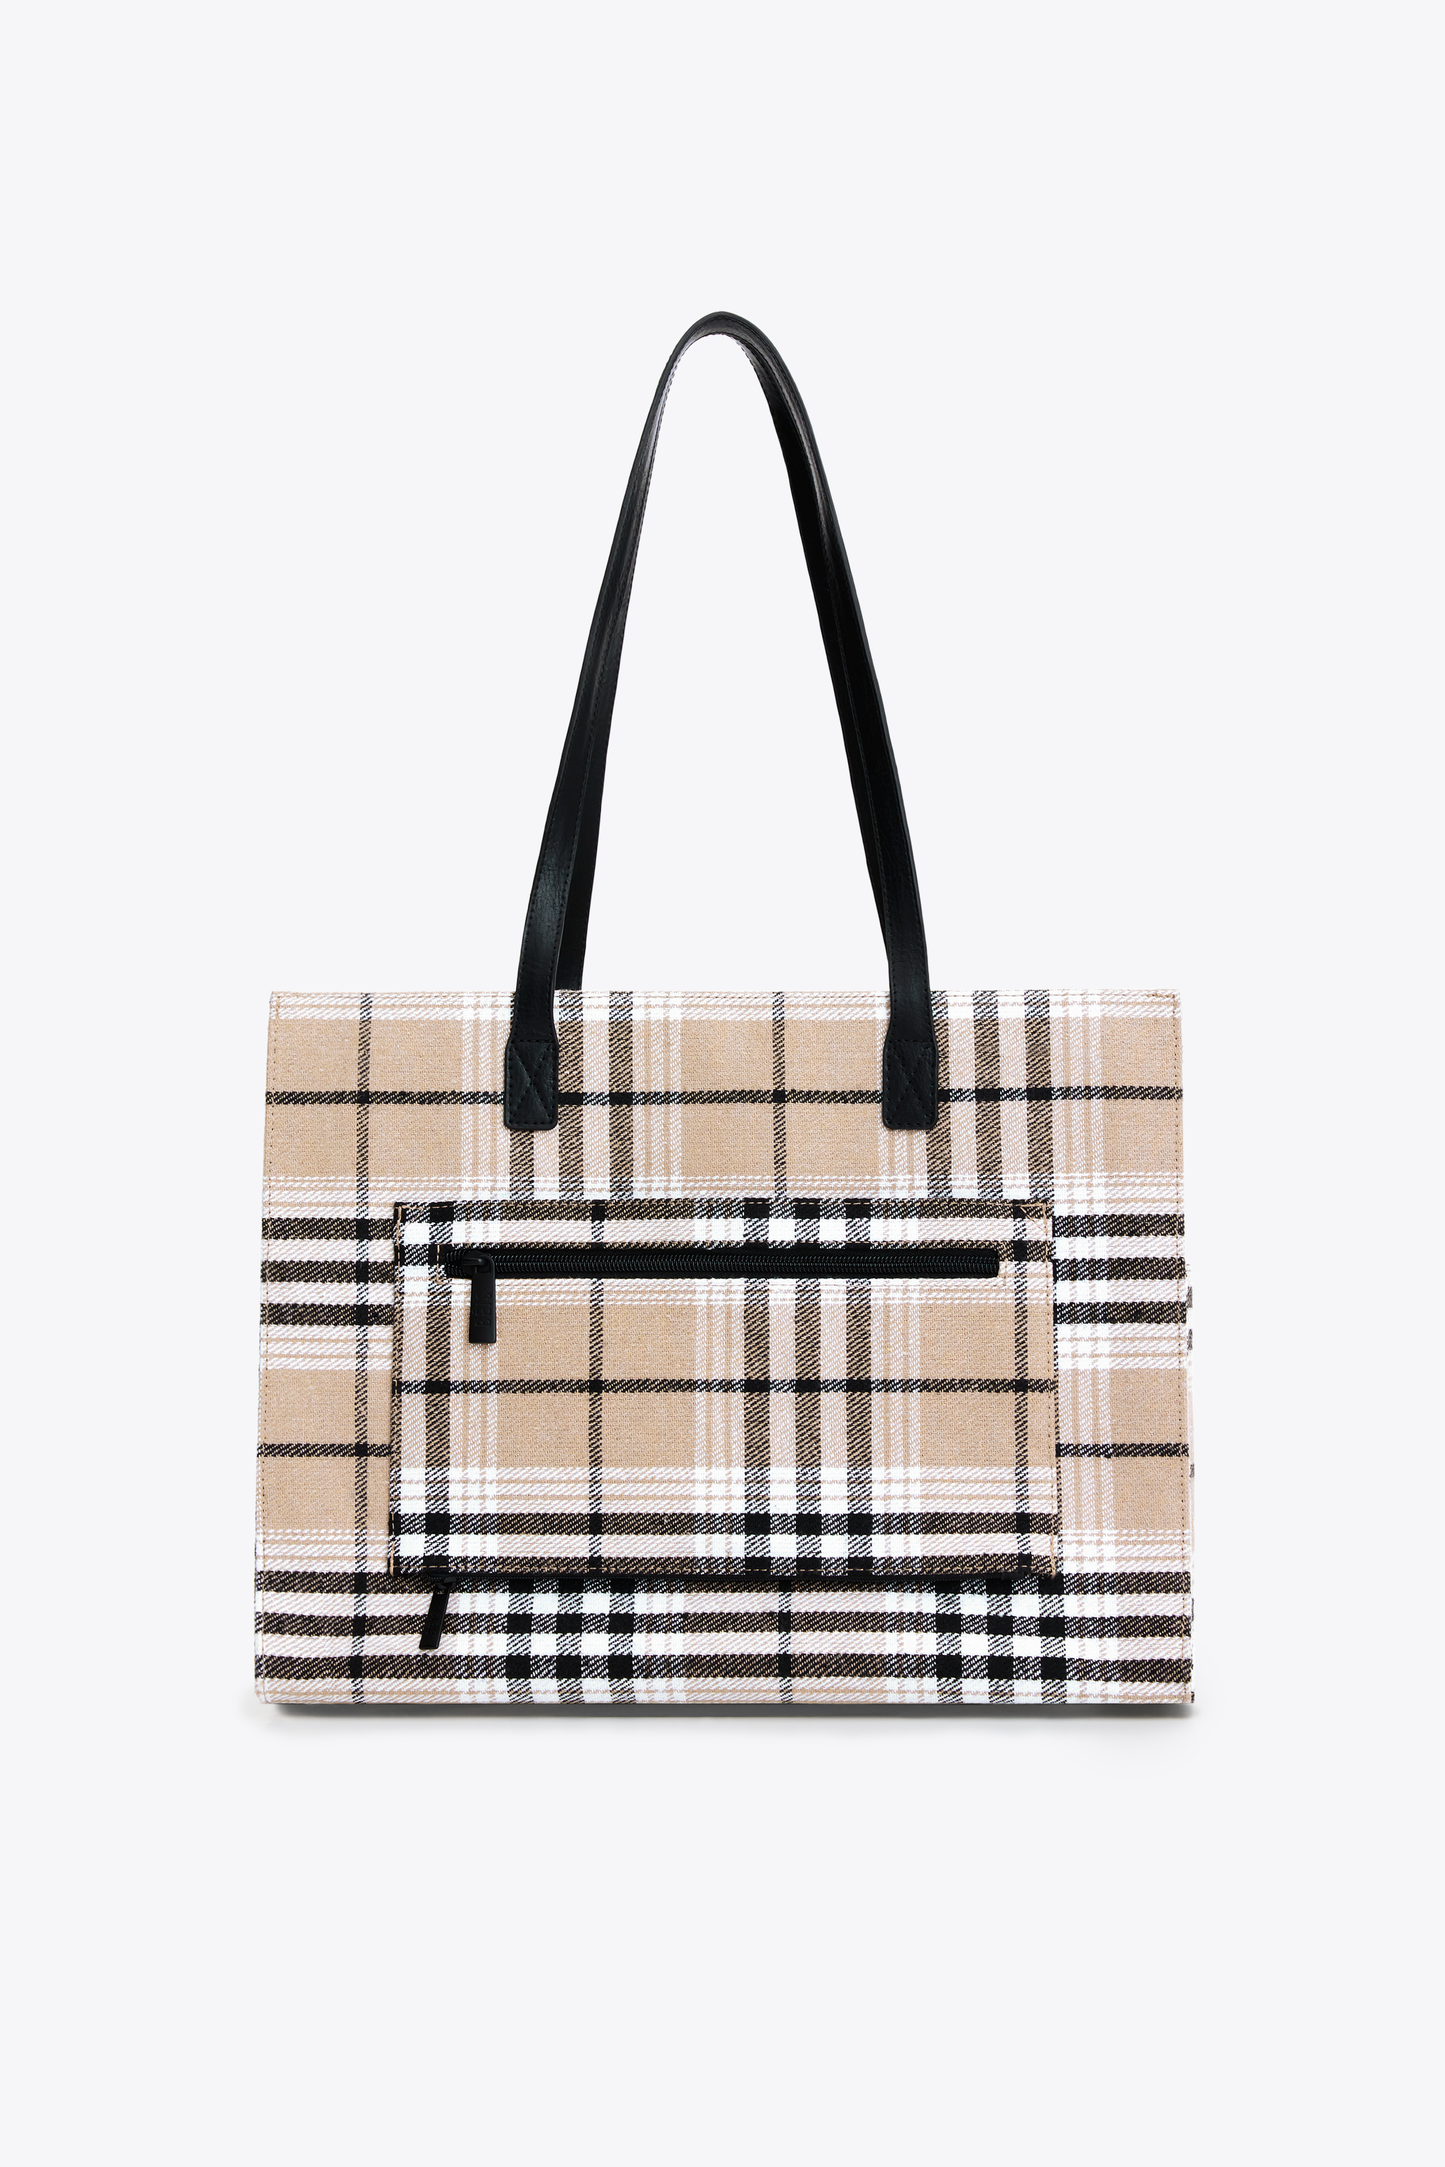 The Work Tote in Plaid